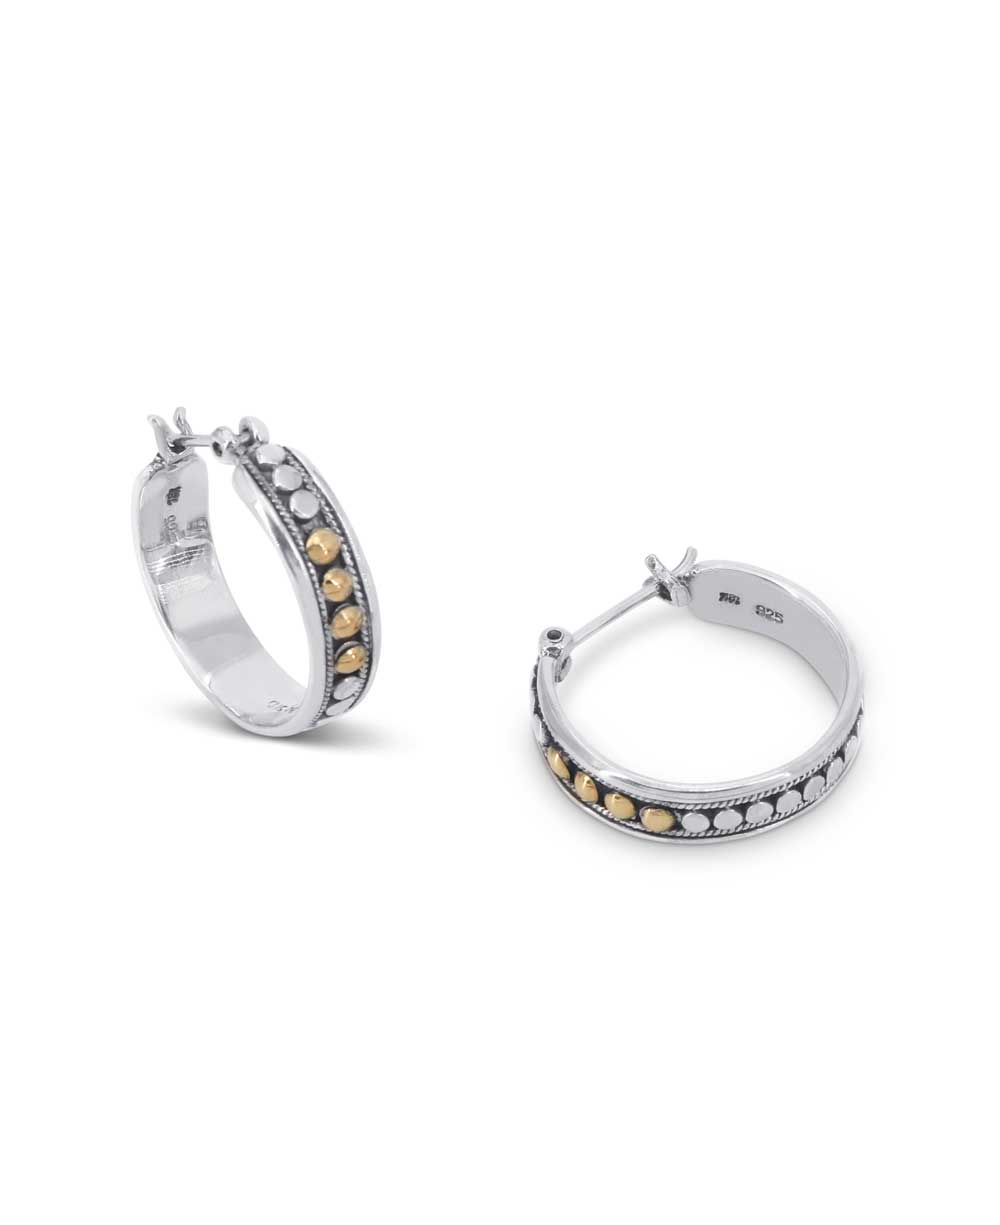 Sterling Silver Hoop Earrings with Gold Plating Accents